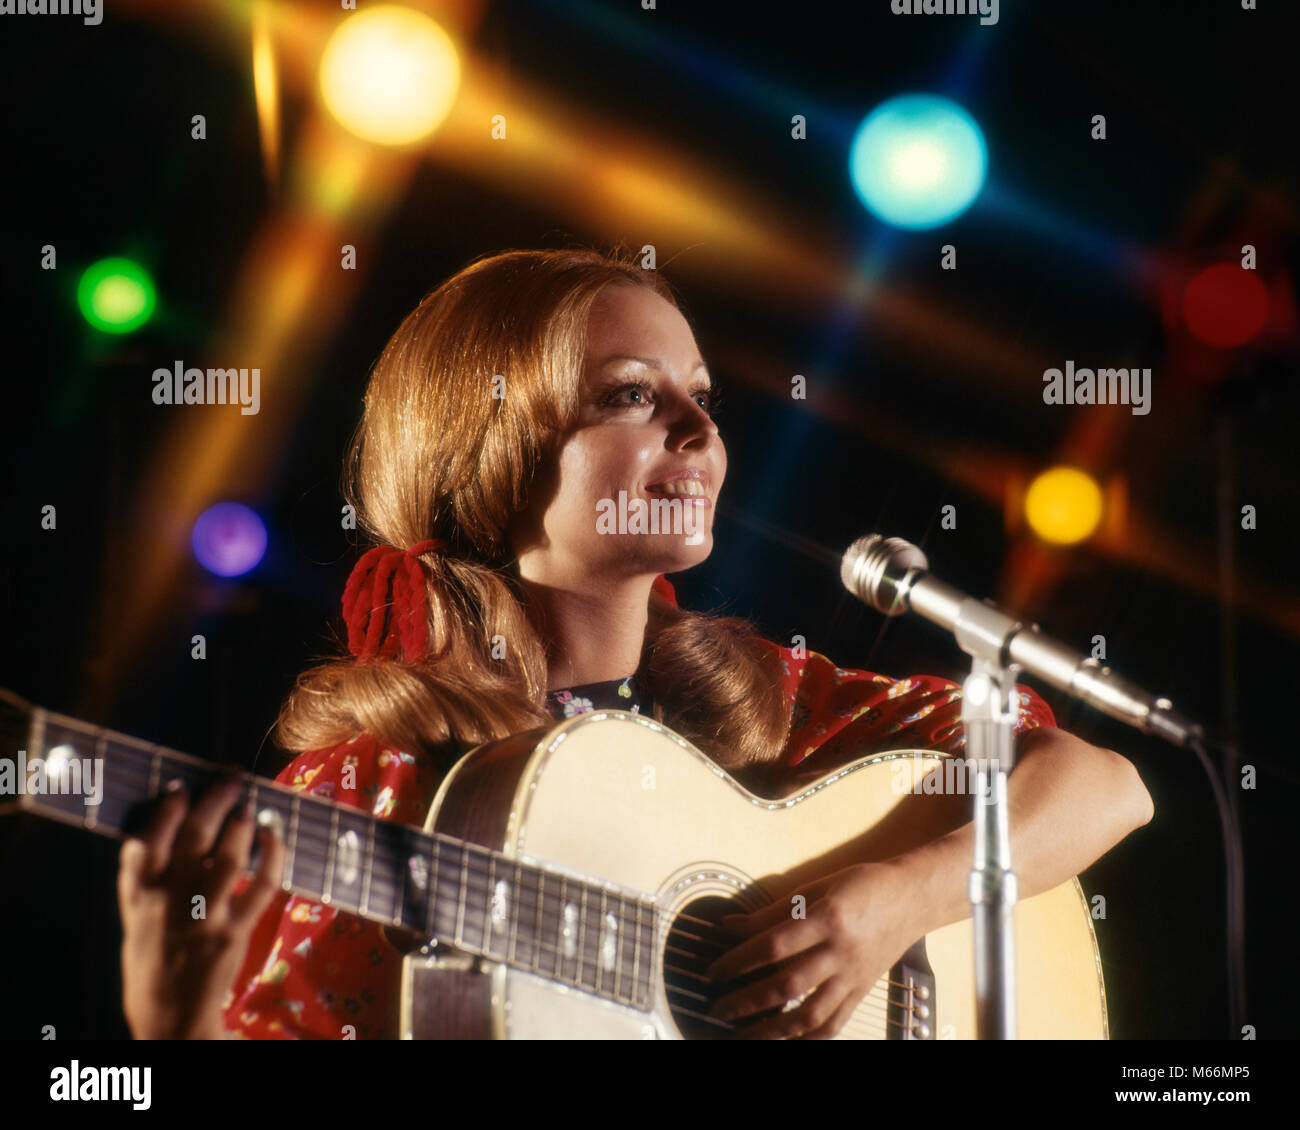 1970s WOMAN FOLK SINGER GUITAR SINGING INTO MICROPHONE COLORFUL SPOTLIGHTS - km3877 HAR001 HARS DREAMS OCCUPATION HAPPINESS HEAD AND SHOULDERS PERFORMER CAREERS SONG VOCAL 18-19 YEARS ENTERTAINER MUSICAL INSTRUMENT VOCALIZE VOCALS FOLK PERFORMERS SONGS ENTERTAINERS SPOTLIGHTS YOUNG ADULT WOMAN CAUCASIAN ETHNICITY FOLK SINGER OCCUPATIONS OLD FASHIONED PERSONS Stock Photo